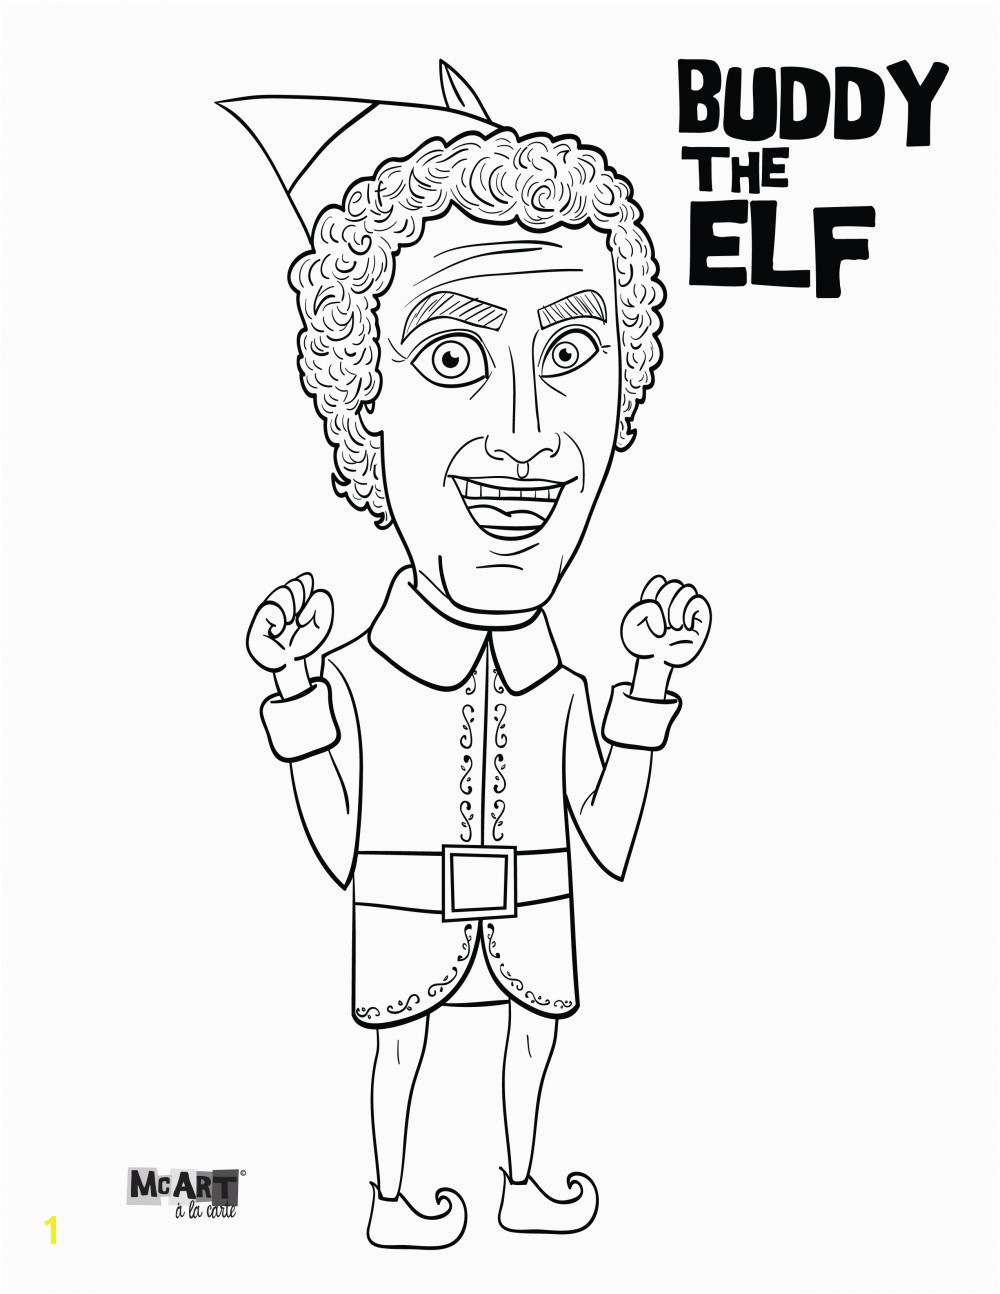 Buddy the Elf Coloring Page